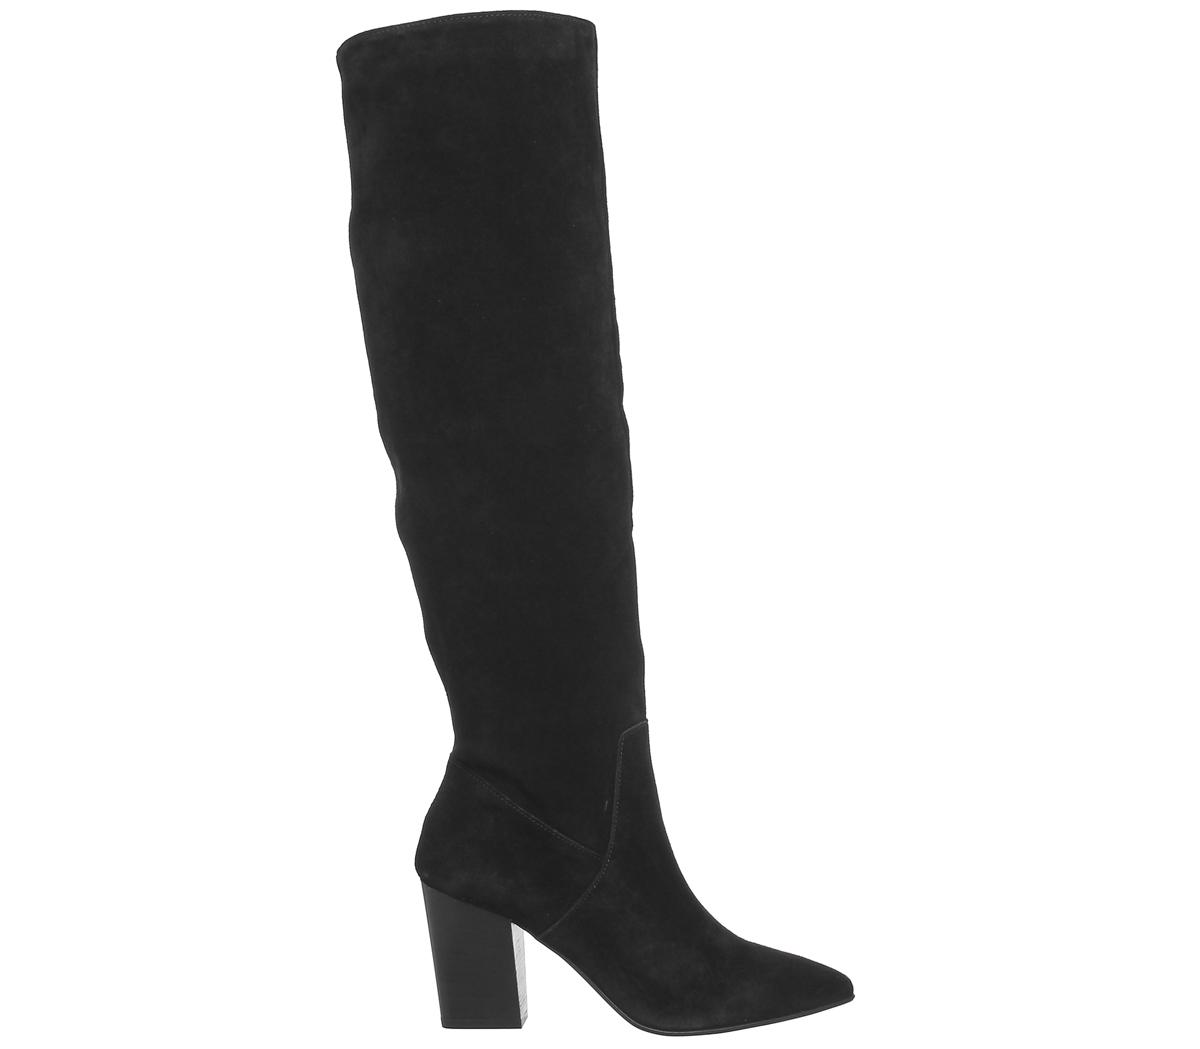 Office Kola Slouch Suede Knee Boots Black Suede - Knee High Boots